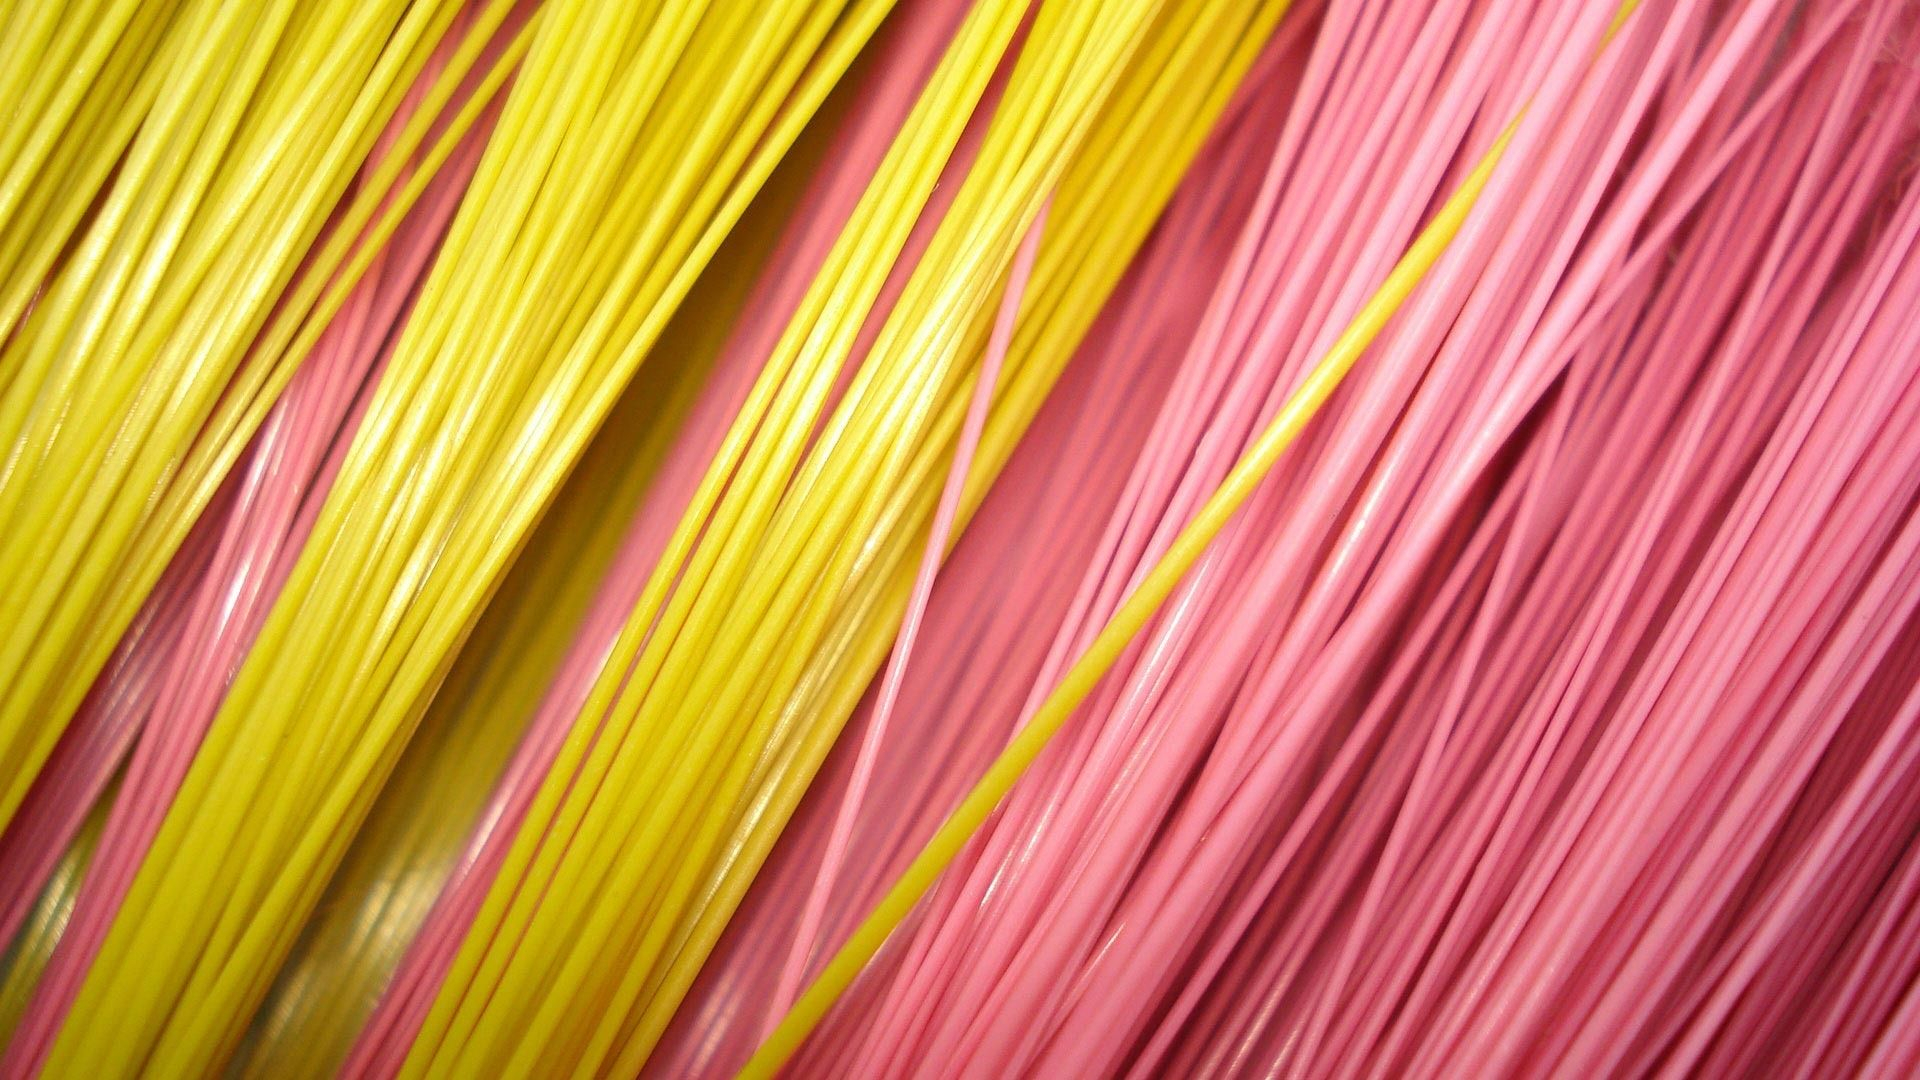 1920x1080 Pink And Yellow HD Abstract Wallpapers